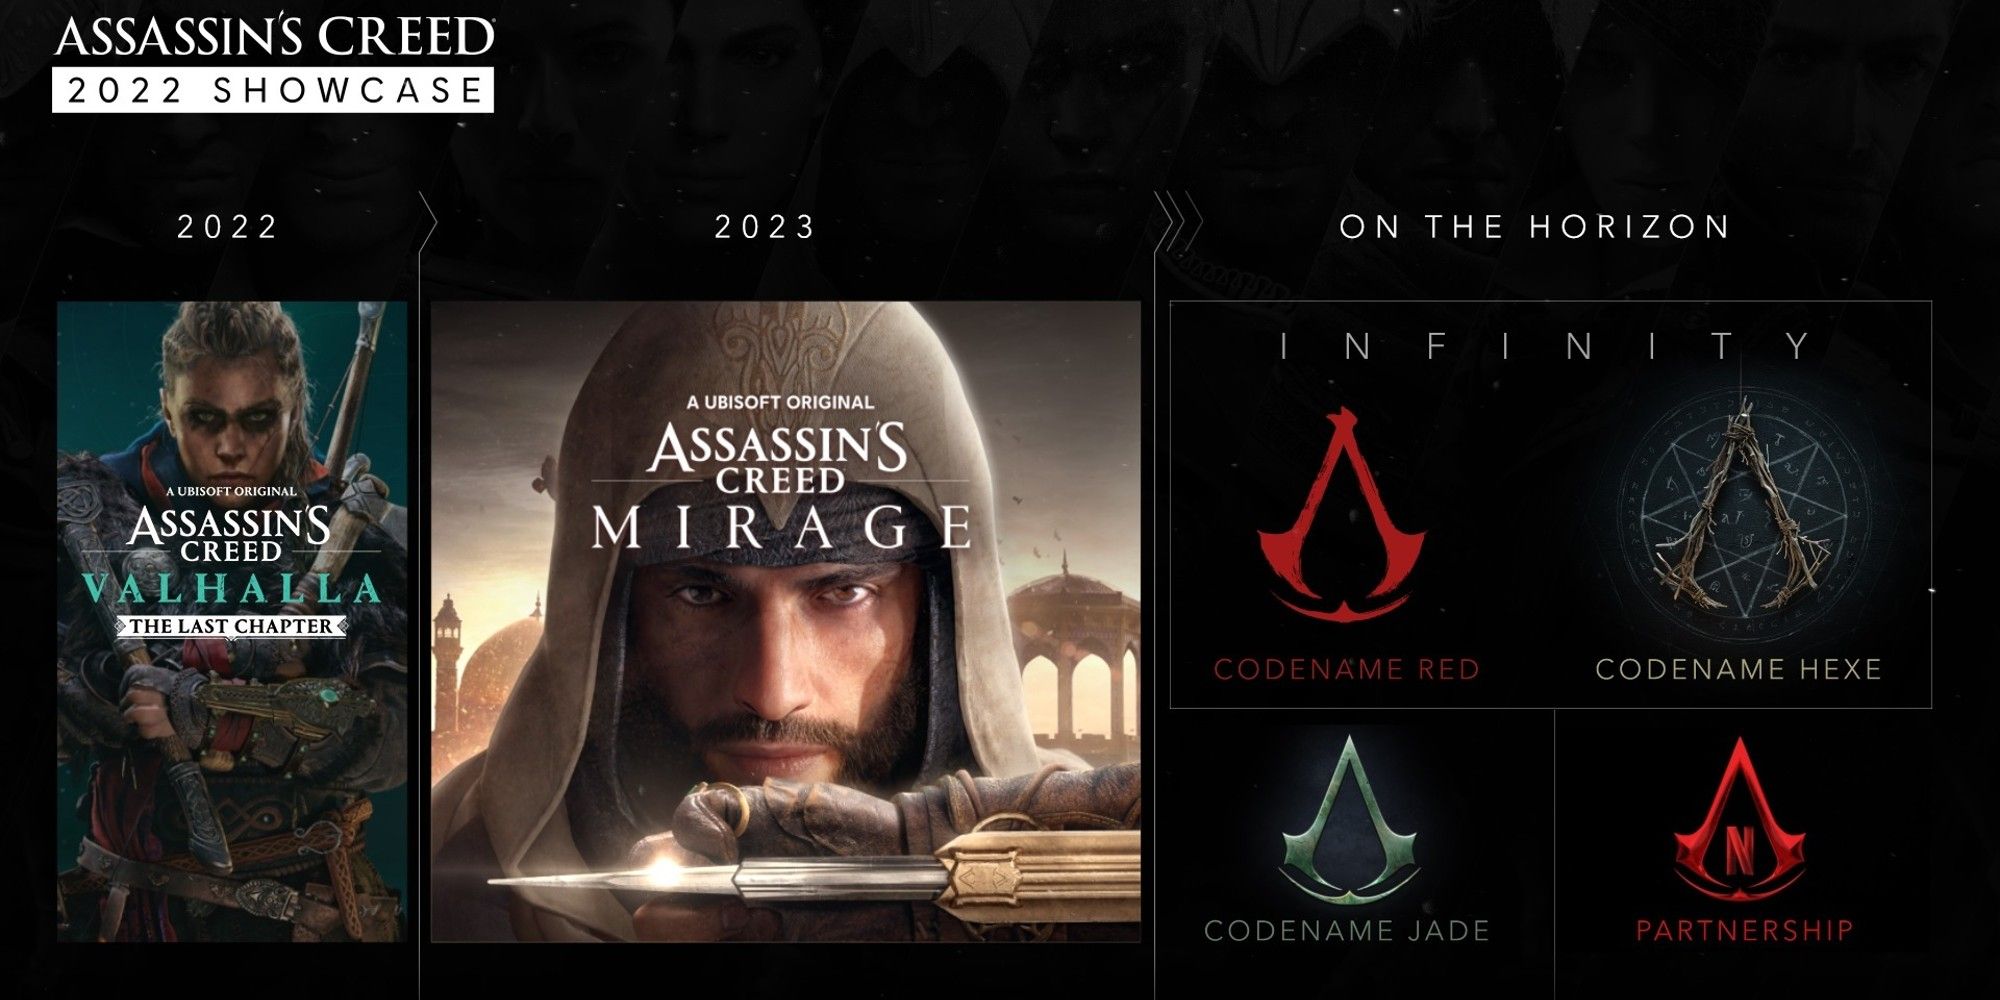 Assassin's Creed franchise roadmap leading up to Infinity